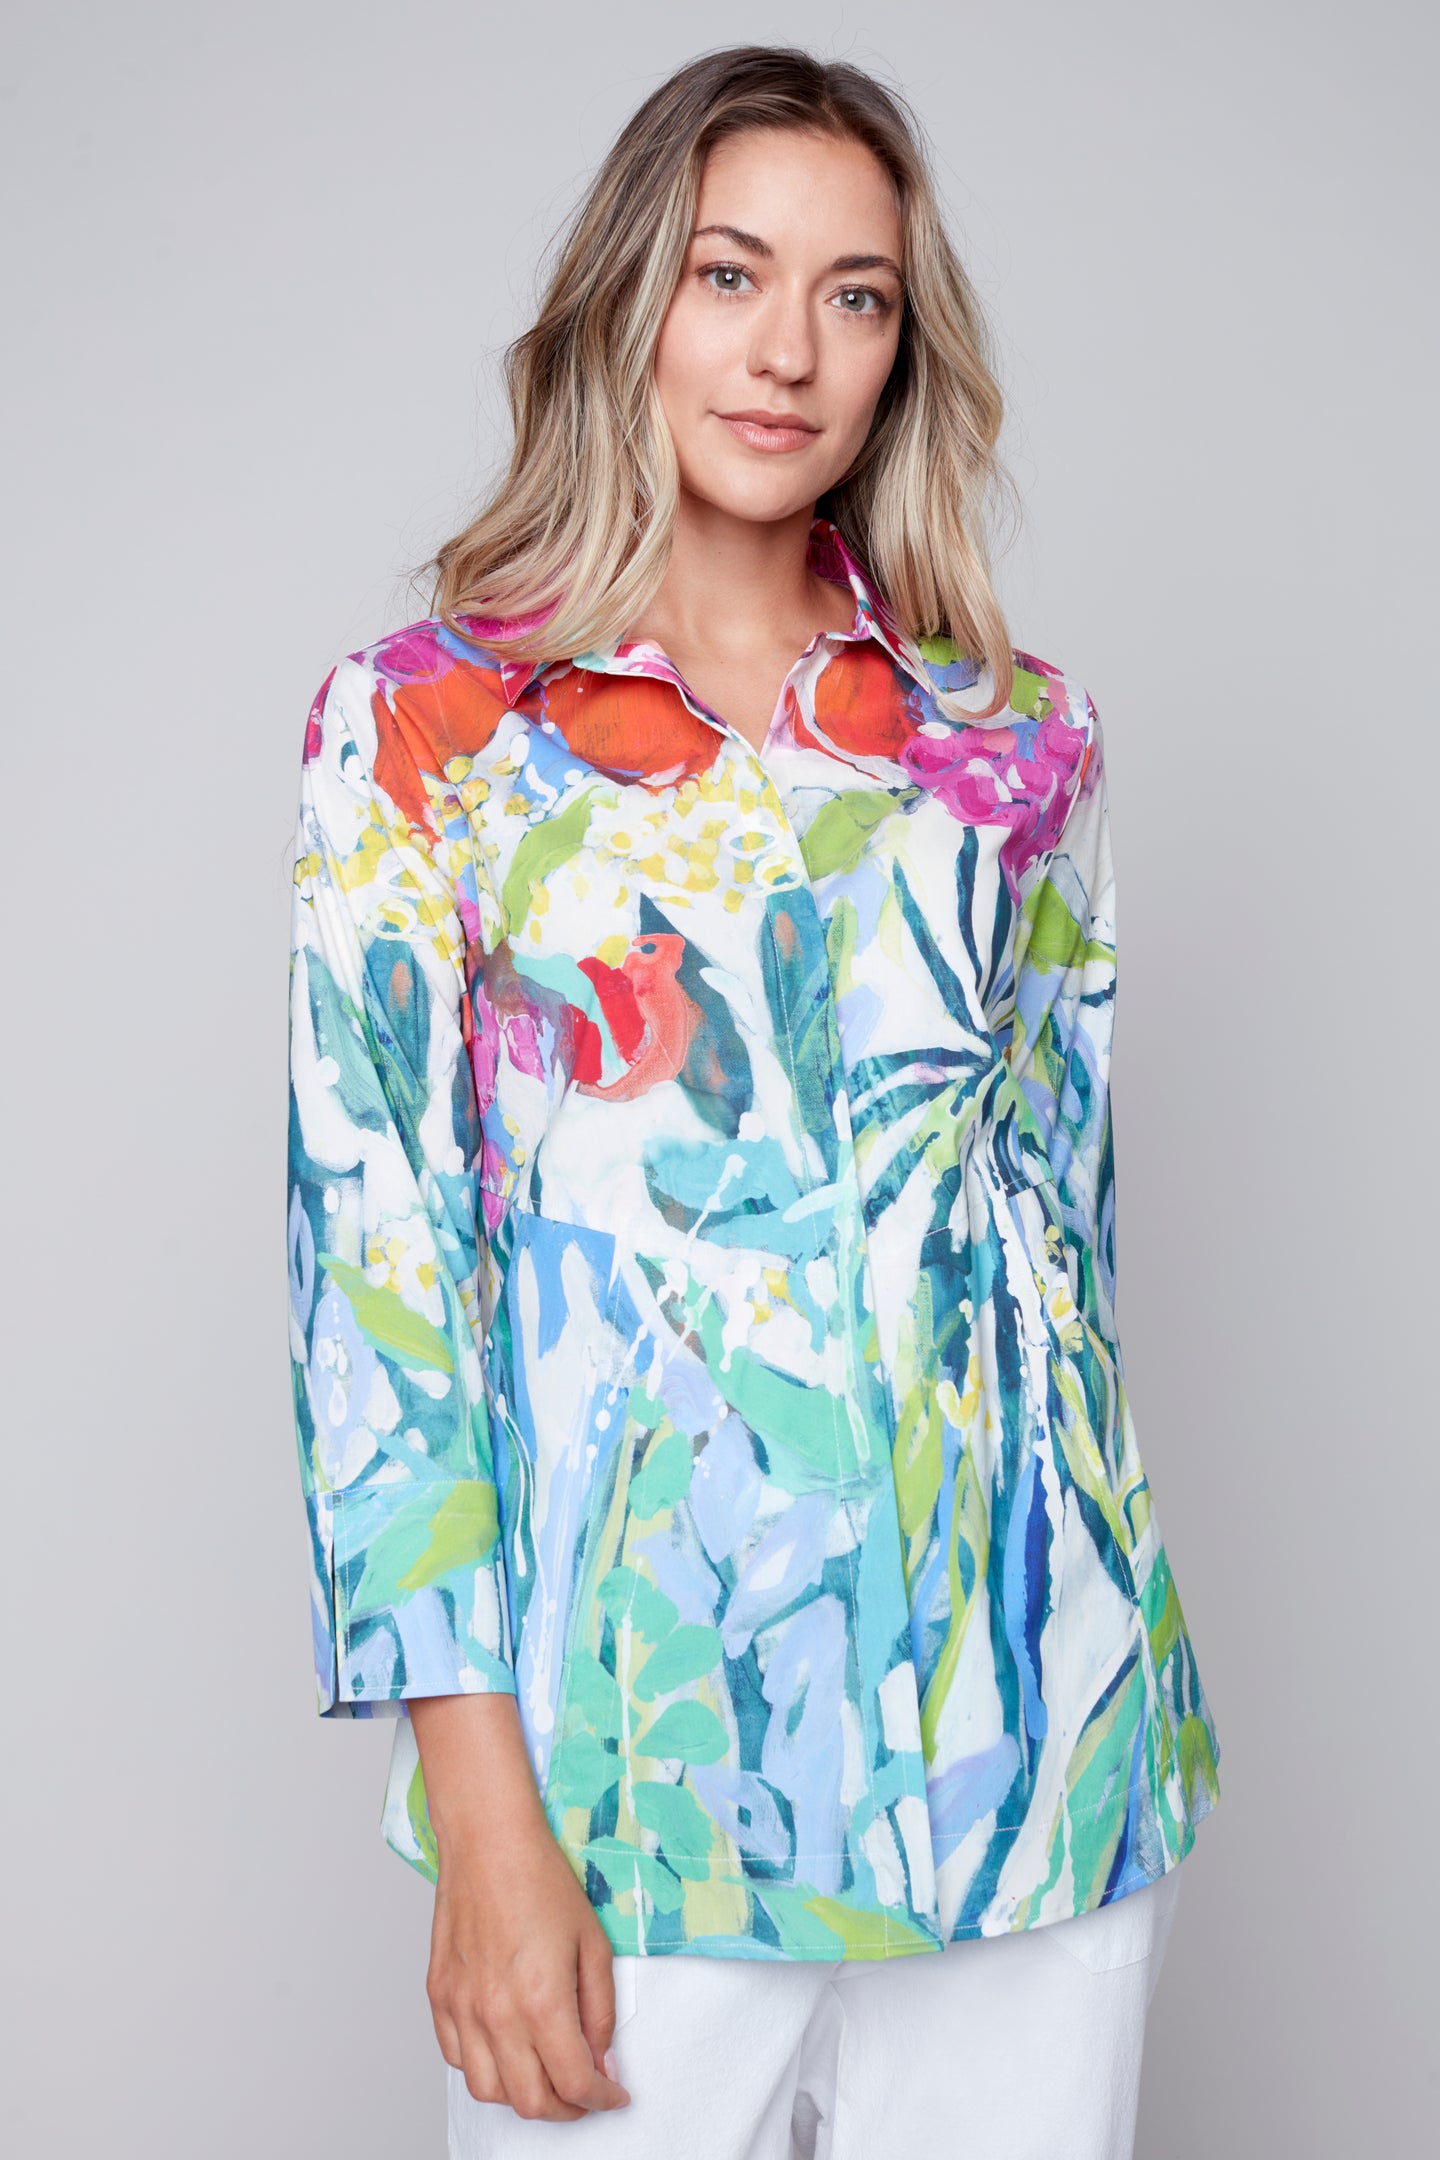 At Liberty in the Garden 3/4-length sleeve blouse